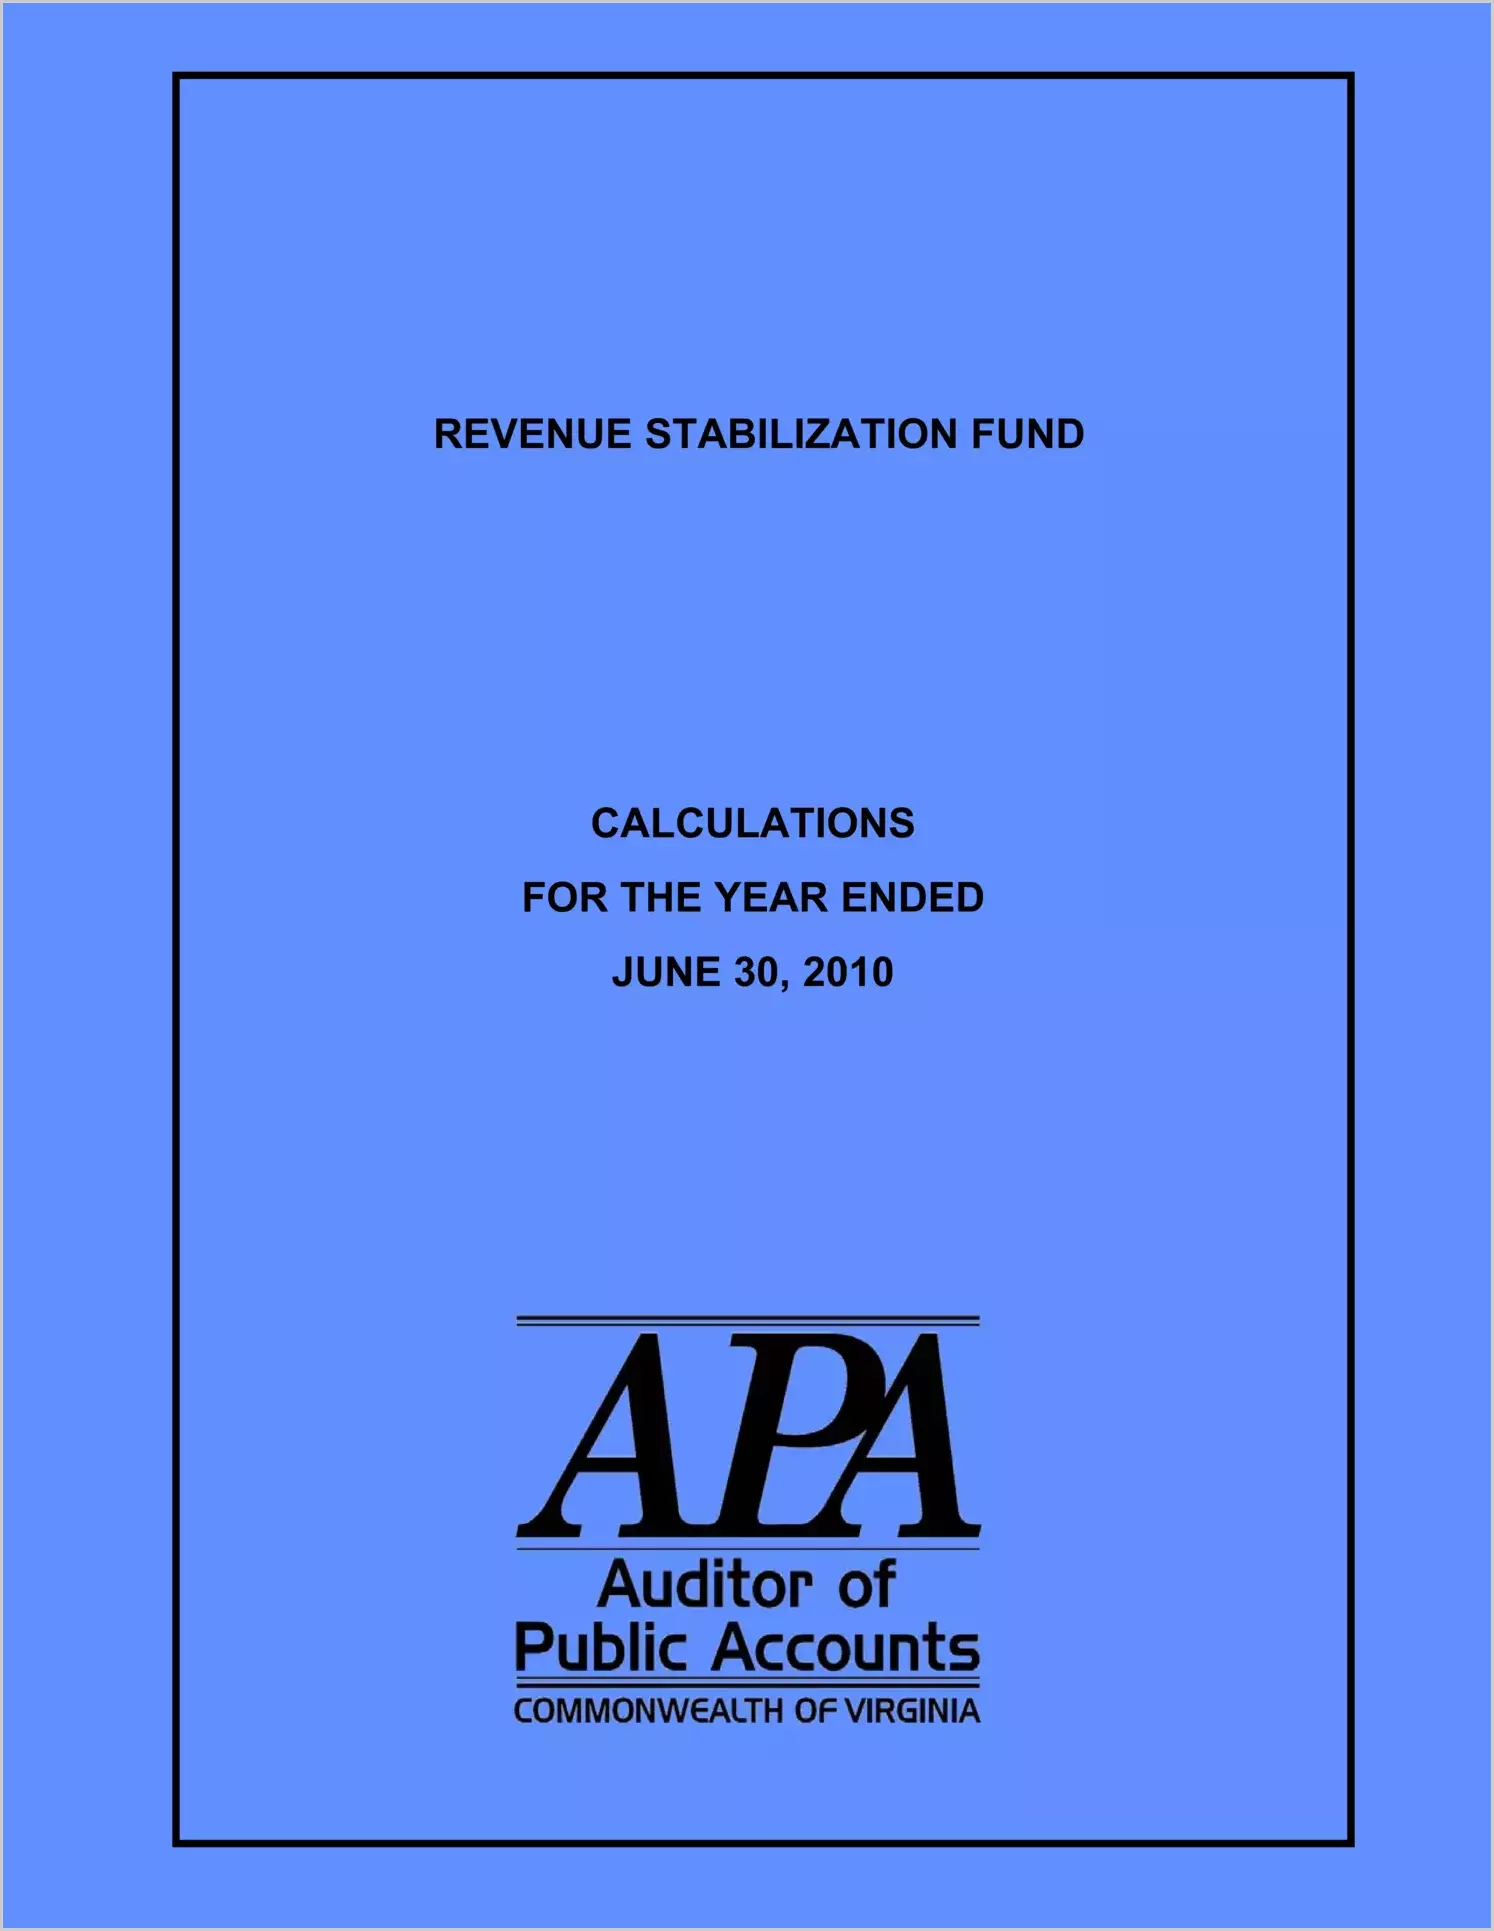 Revenue Stabilization Fund Calculations for the year ended June 30, 2010